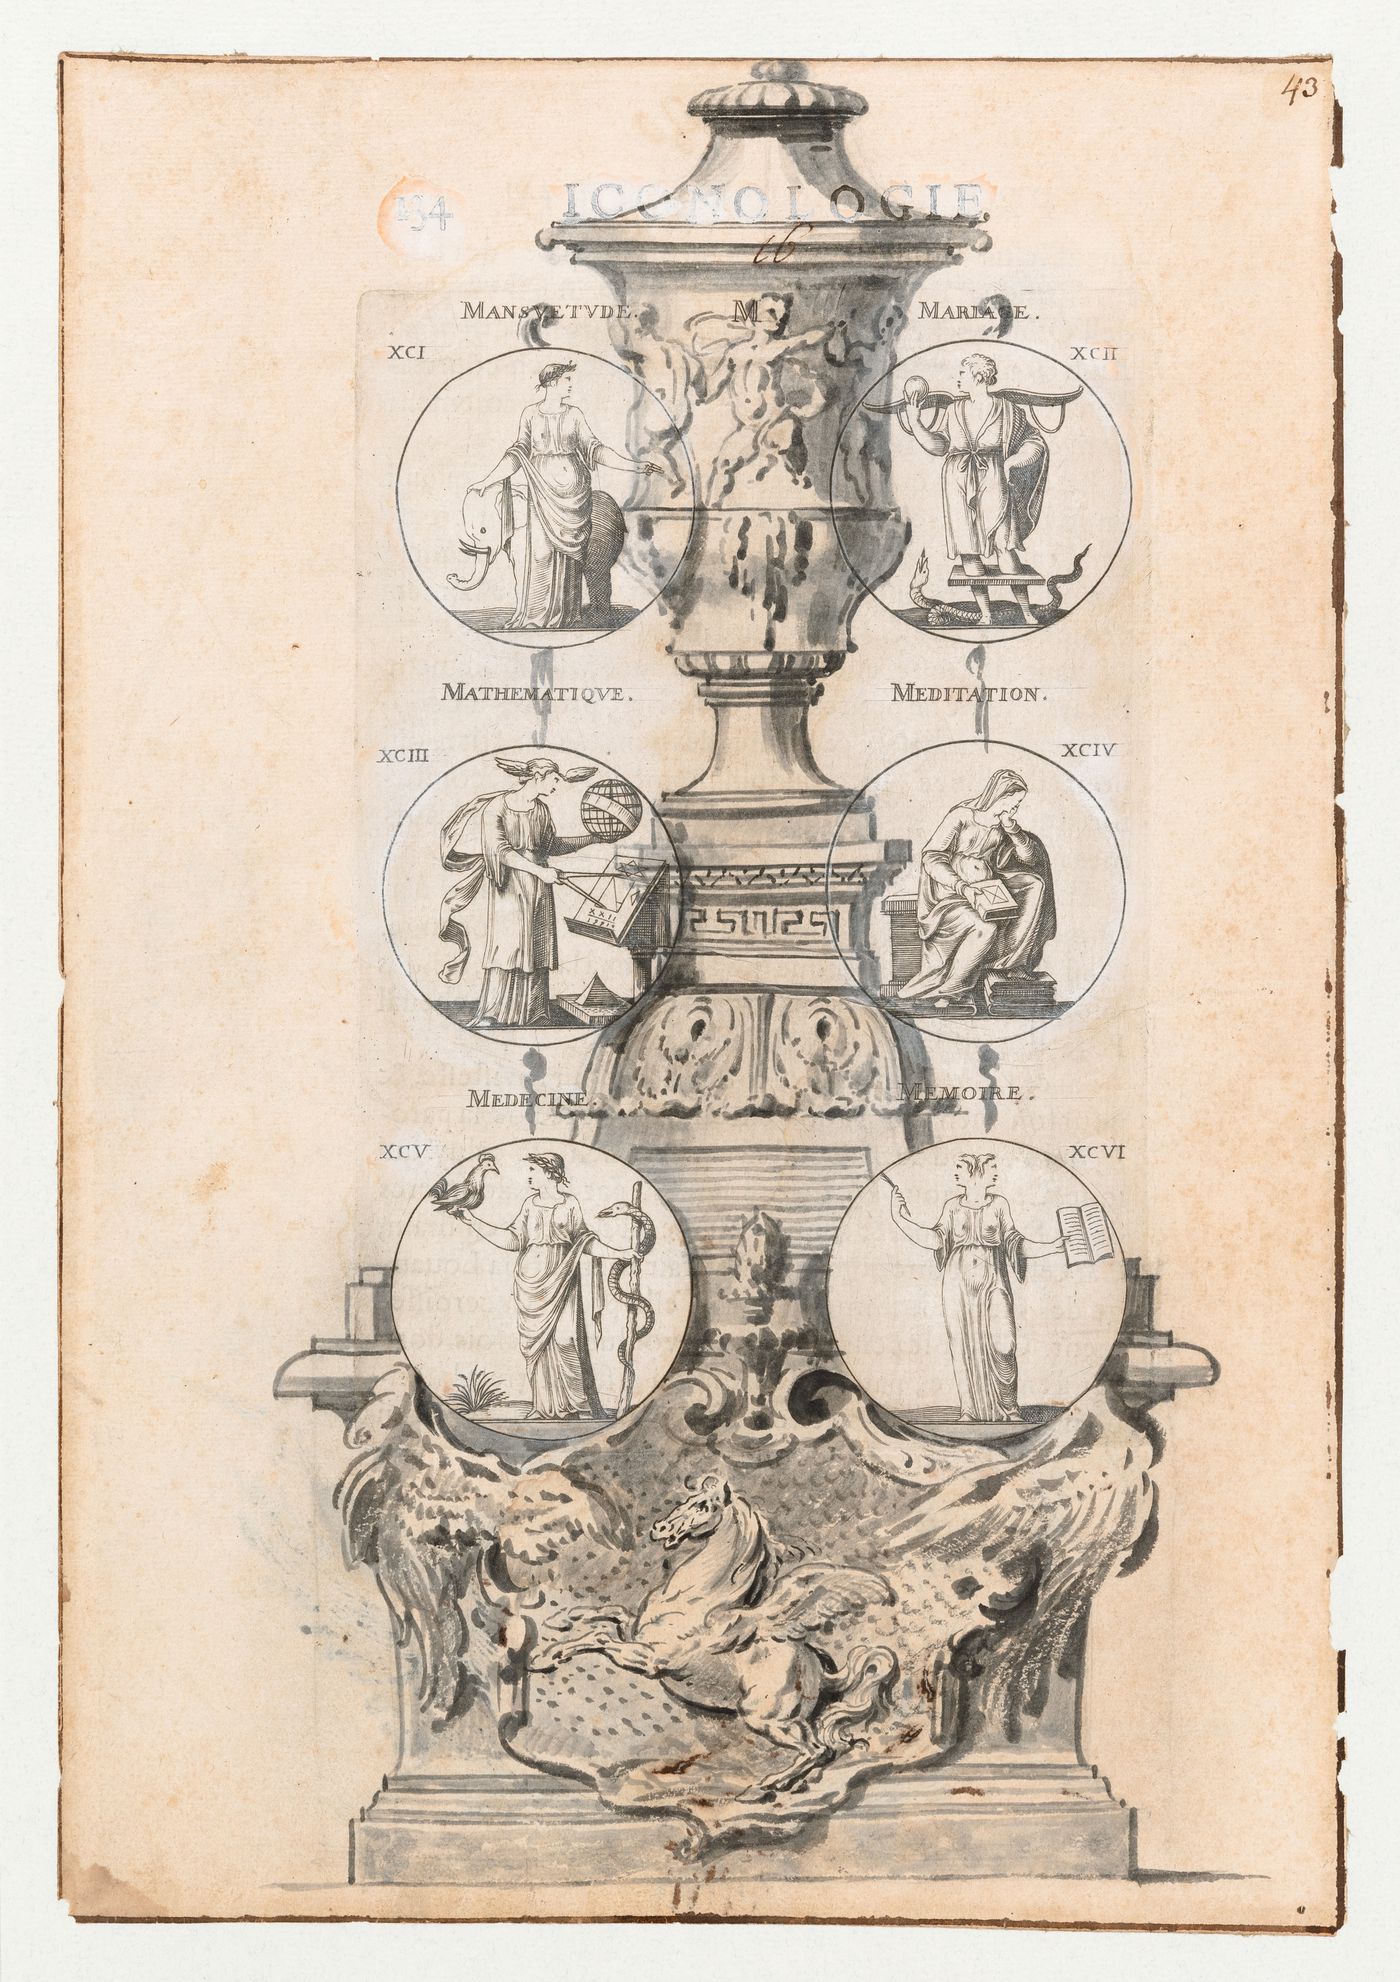 Ornamental drawing on a folio of the 1636 French edition of Cesare Ripa's "Iconologie"